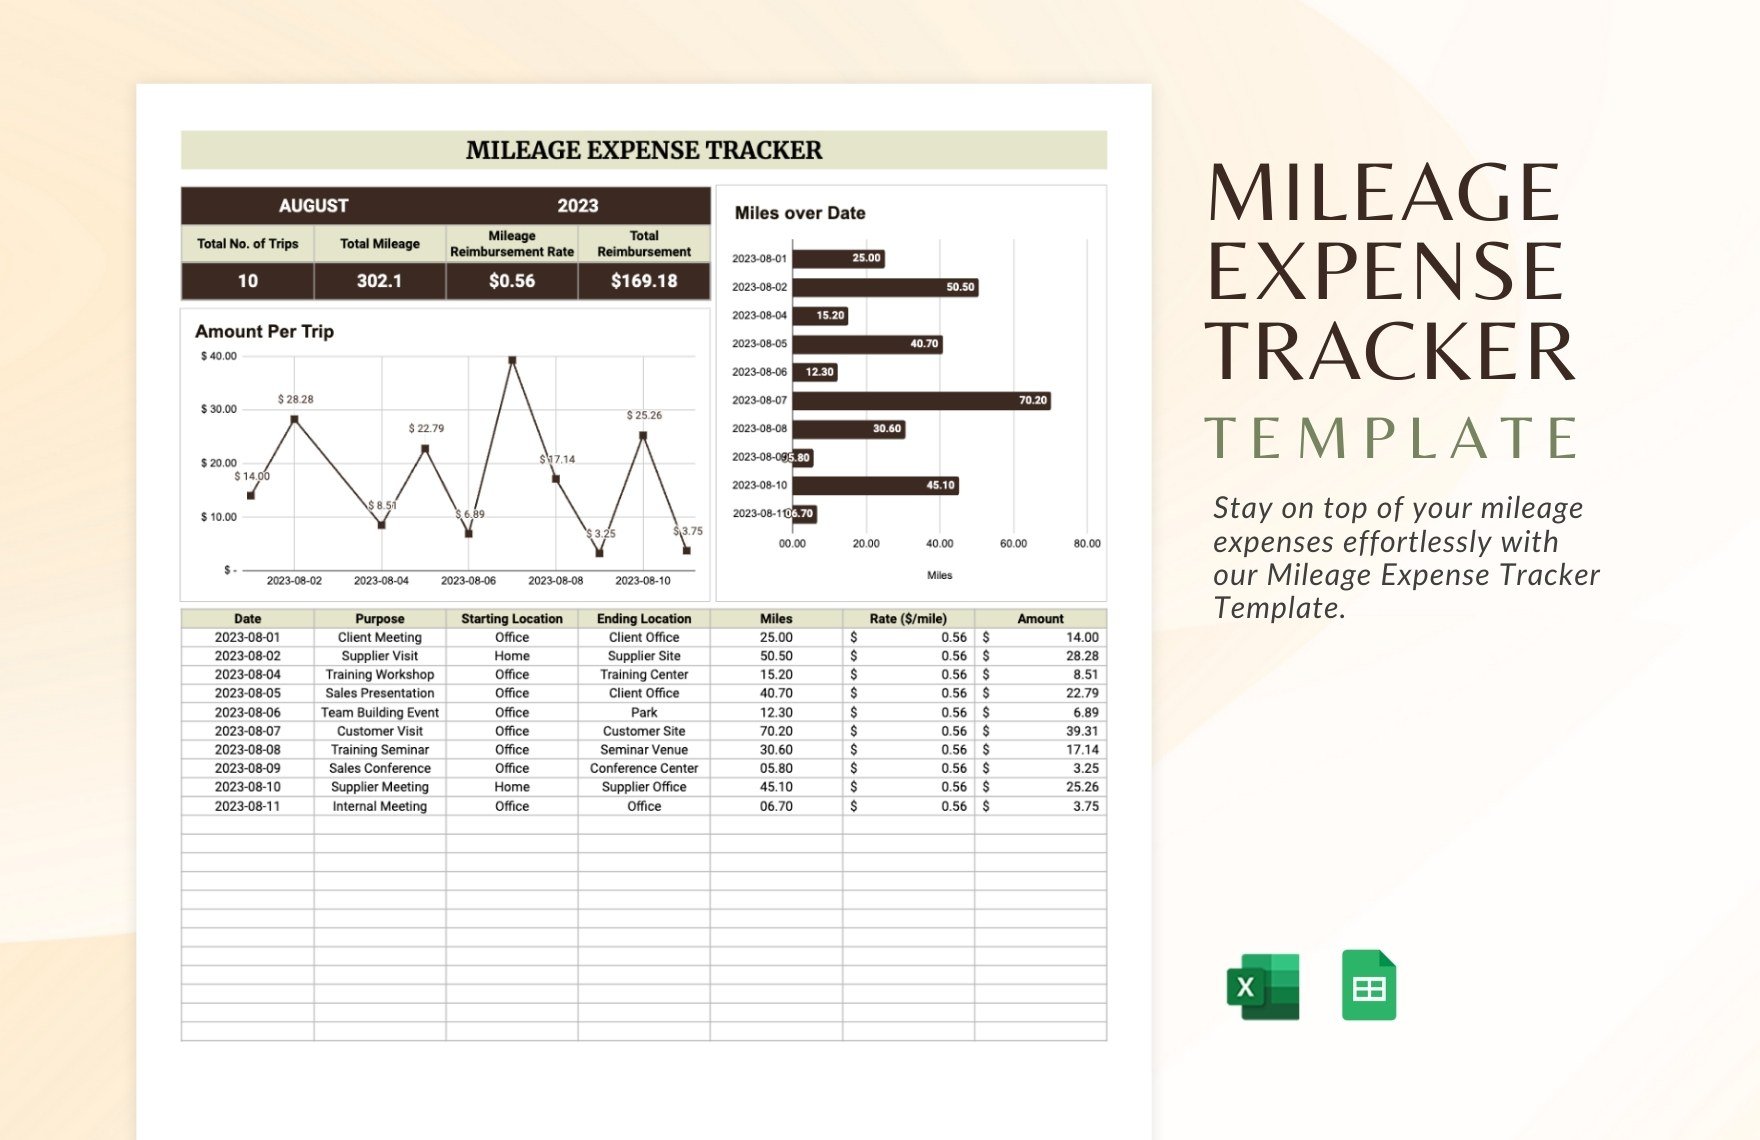 Mileage Expense Tracker Template in Excel, Google Sheets